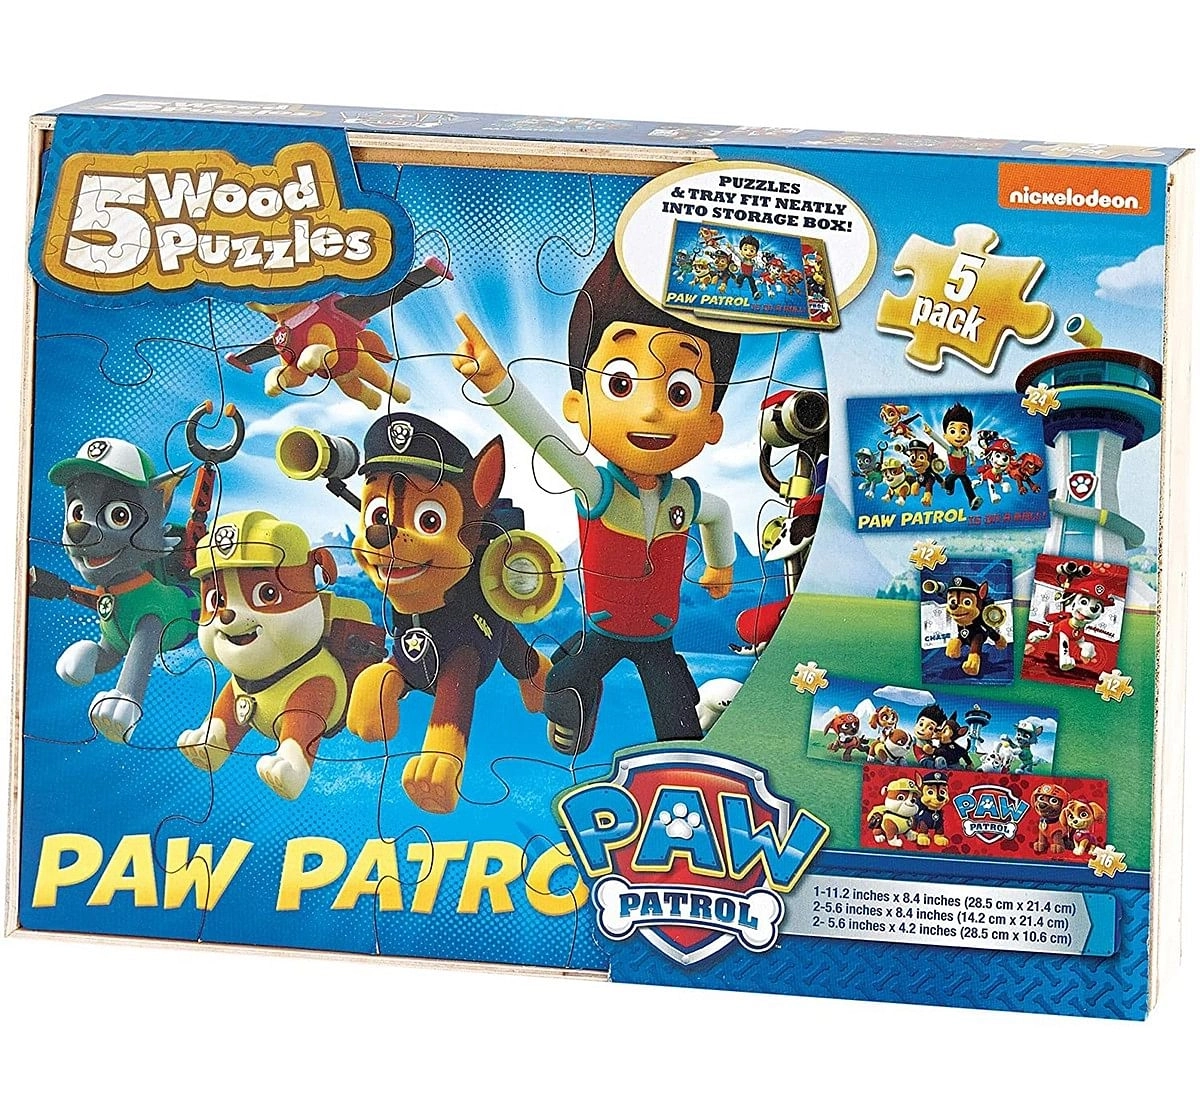 Cardinal Games Paw Patrol 4 Wood Puzzles Quirky Soft Toys for Kids age 3Y+ - 23 Cm 